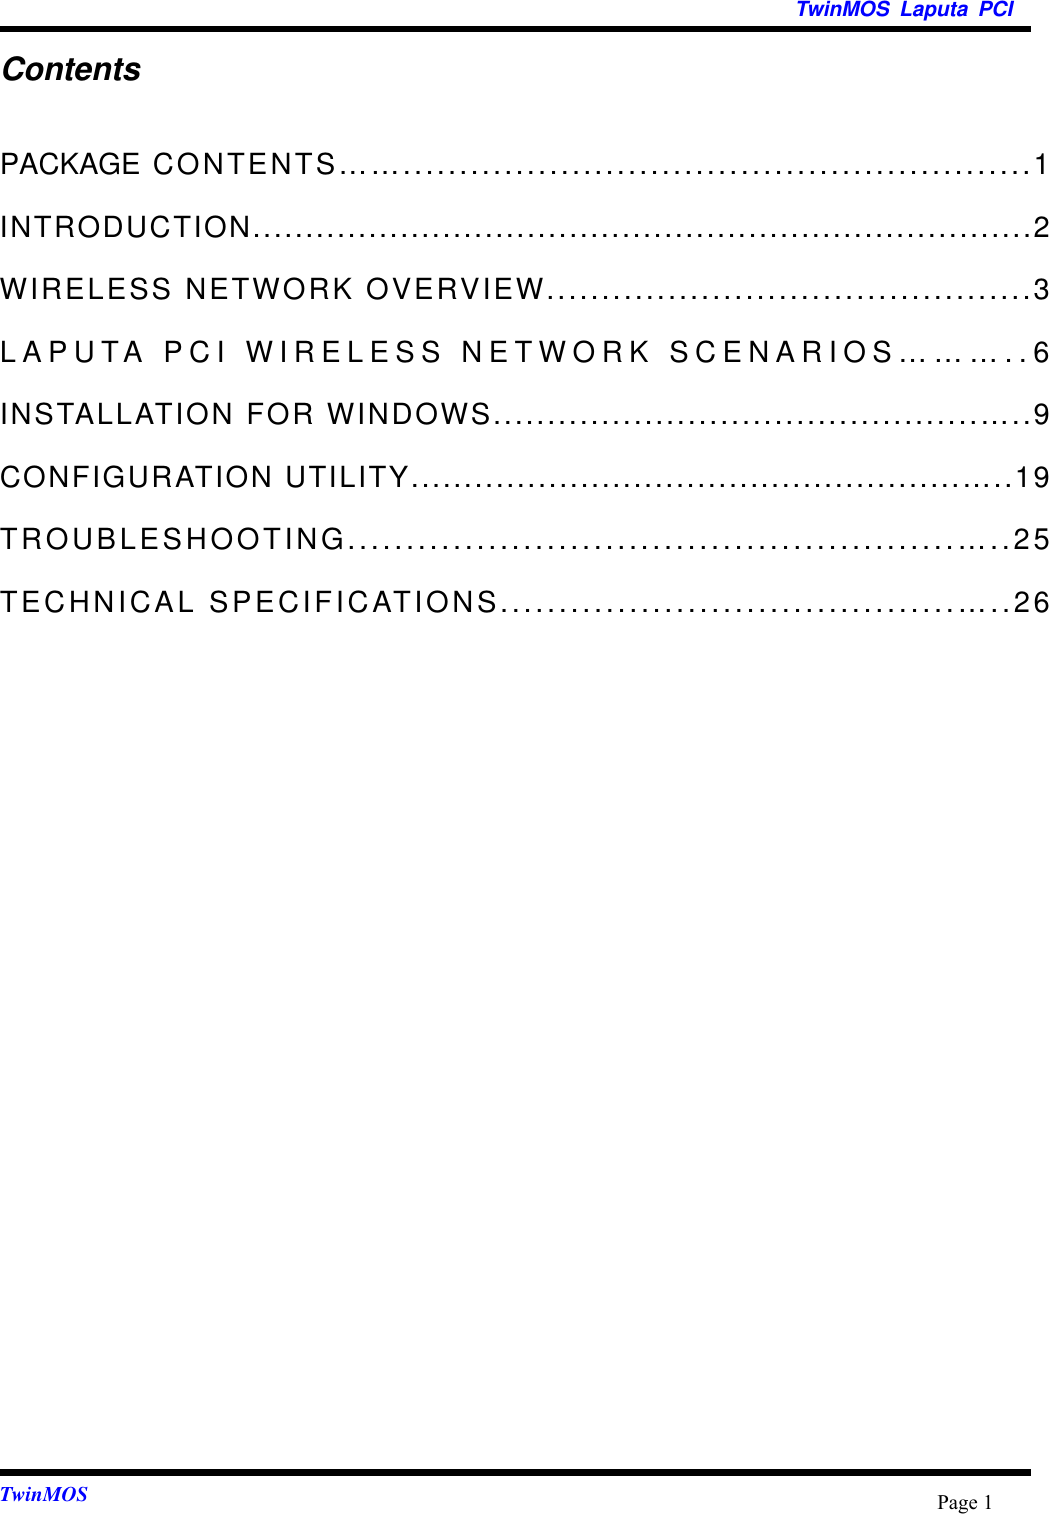 TwinMOS Laputa PCITwinMOS Page 1ContentsPACKAGE CONTENTS……........................................................1INTRODUCTION..........................................................................2WIRELESS NETWORK OVERVIEW............................................3LAPUTA PCI WIRELESS NETWORK SCENARIOS………..6INSTALLATION FOR WINDOWS.............................................…..9CONFIGURATION UTILITY....................................................…..19TROUBLESHOOTING....................................................…..25TECHNICAL SPECIFICATIONS.......................................…..26